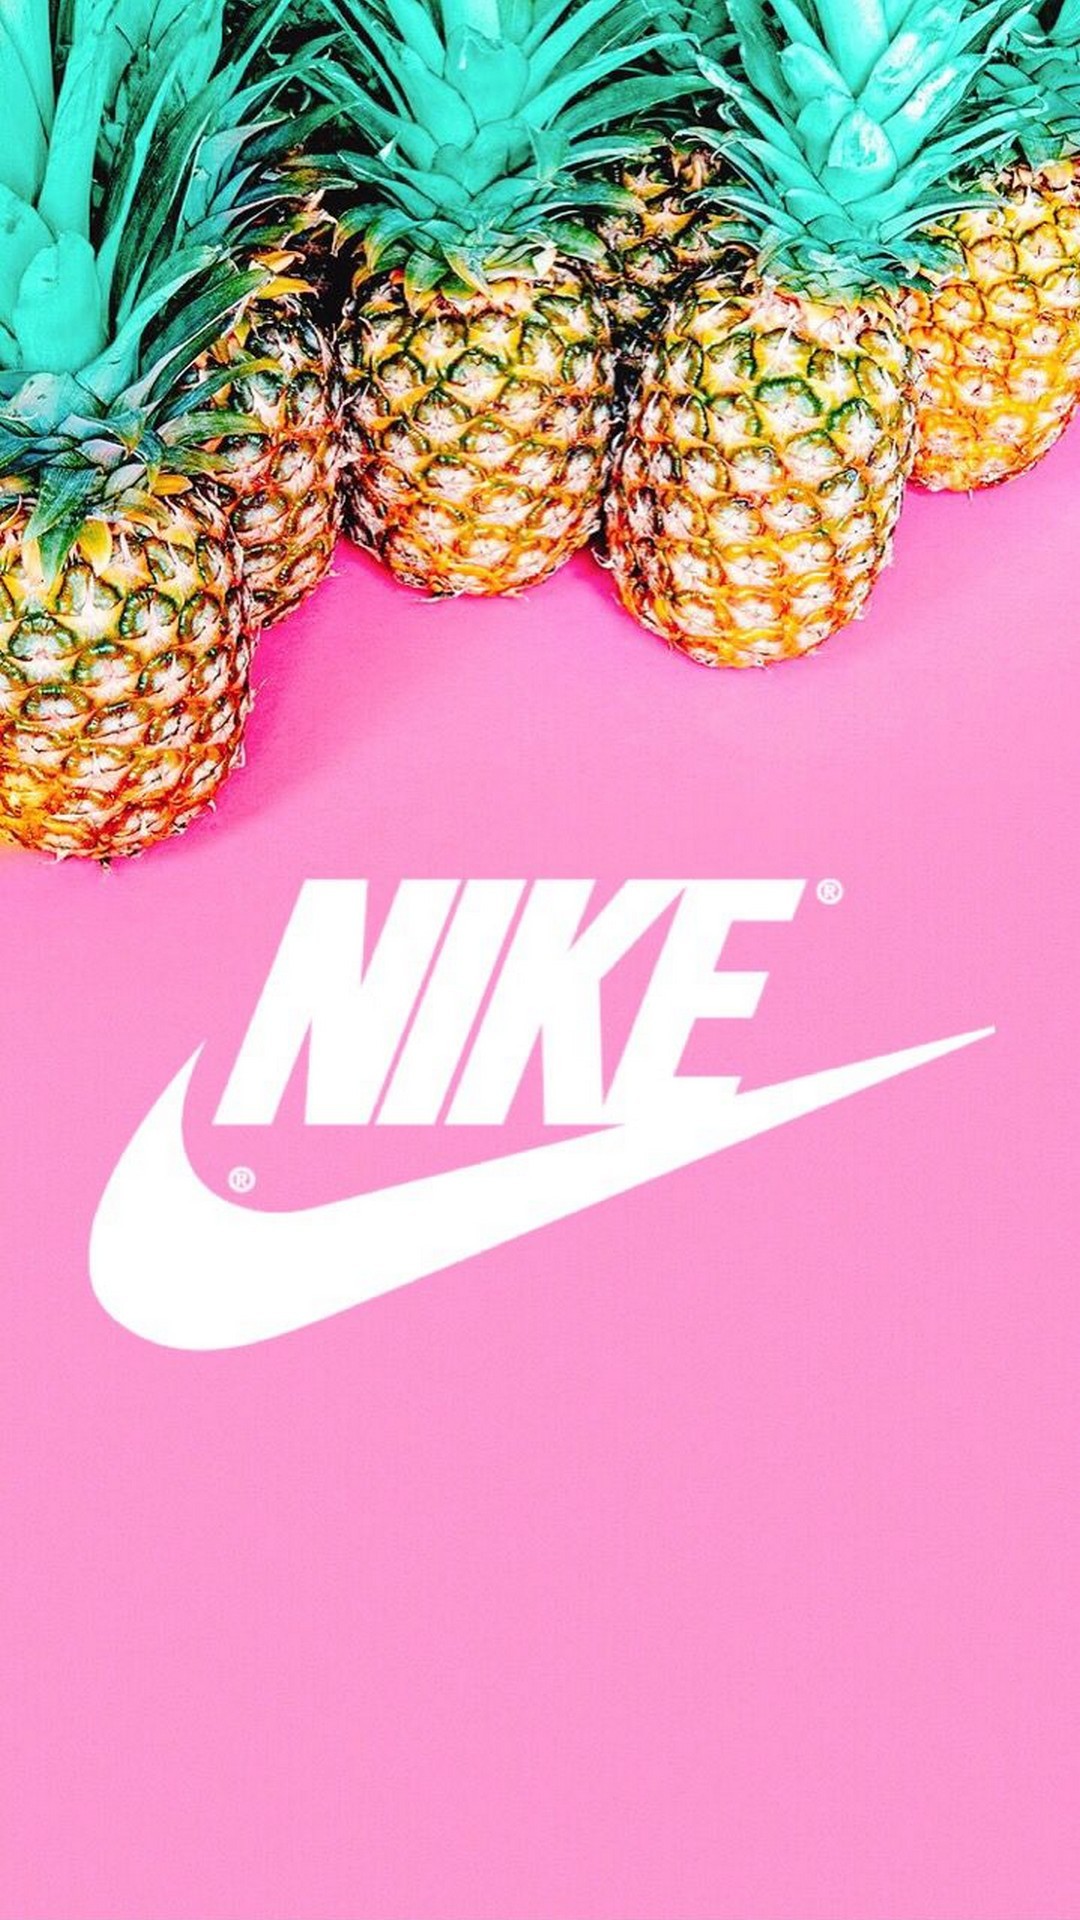 1080x1920 Nike Pineapple Pink Background resolution 